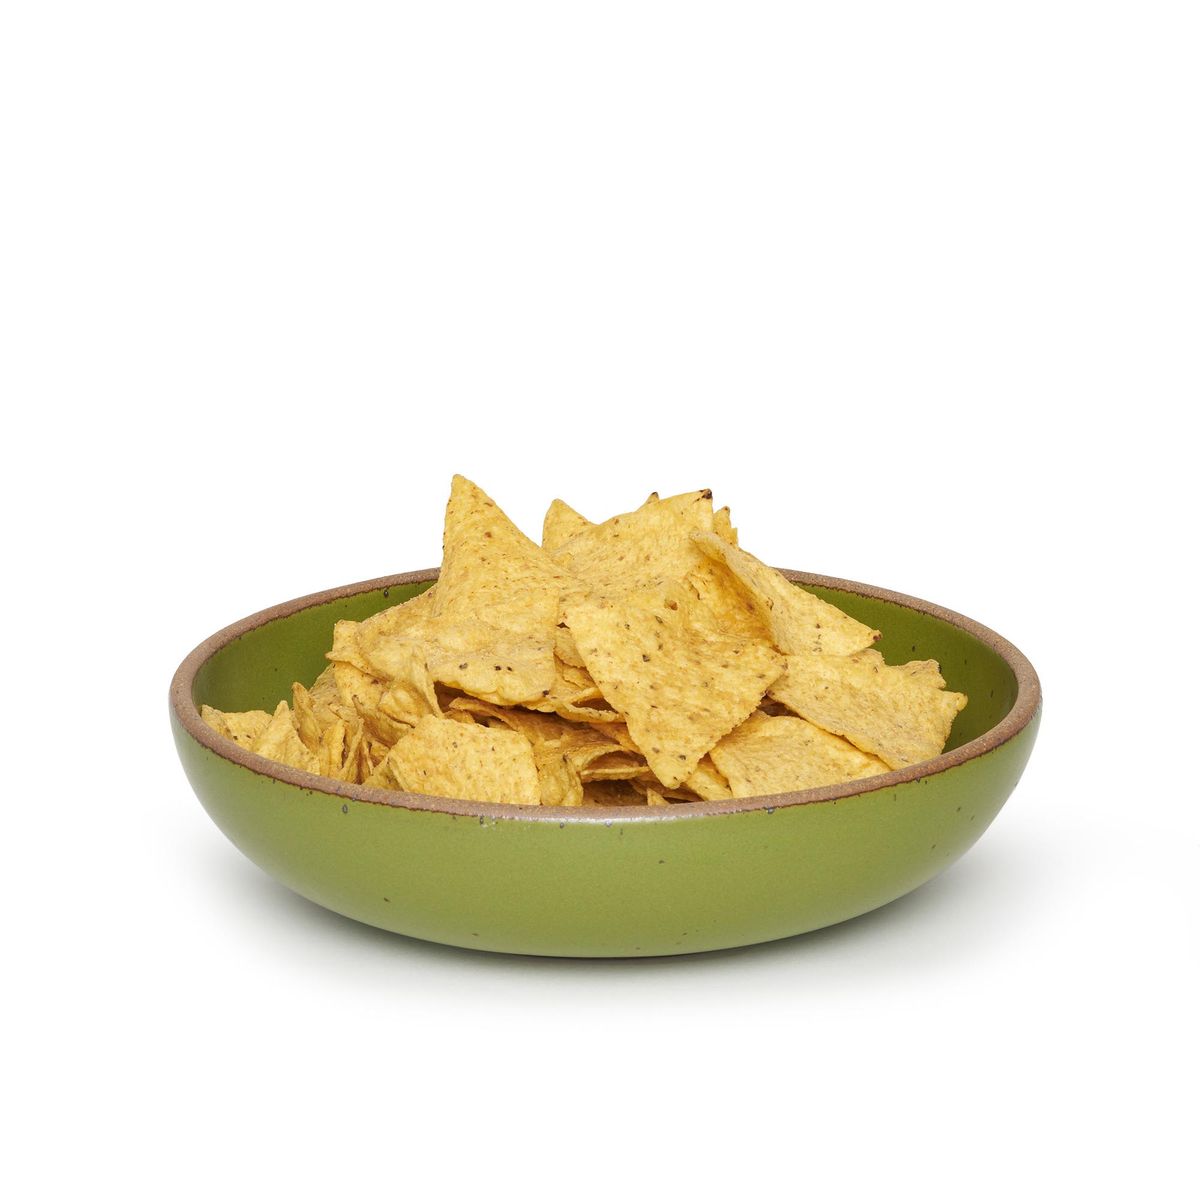 The Weeknight Serving Bowl, a mossy olive green. Filled with a party serving of tortilla chips.